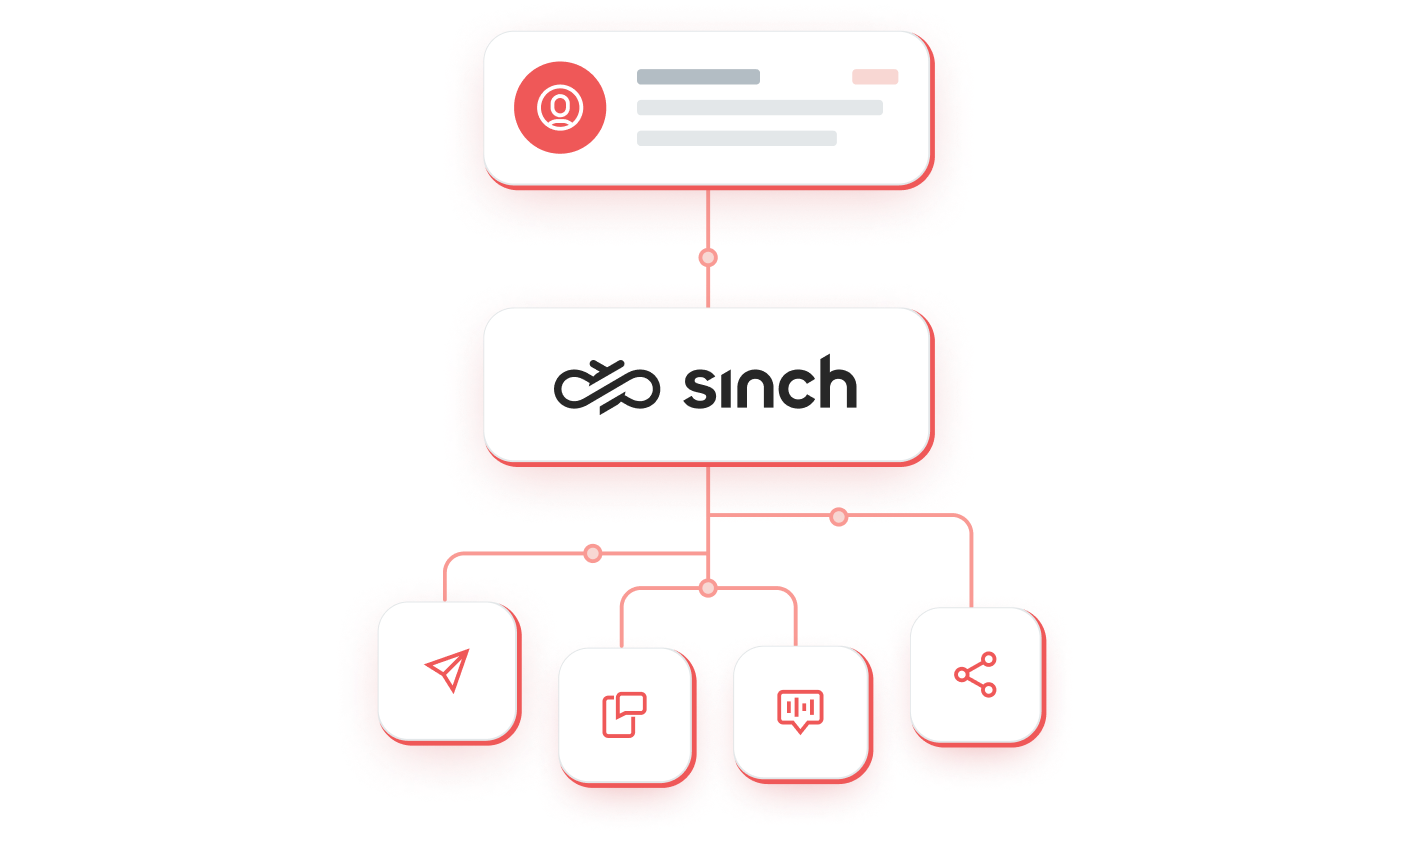 Sinch Email connections.